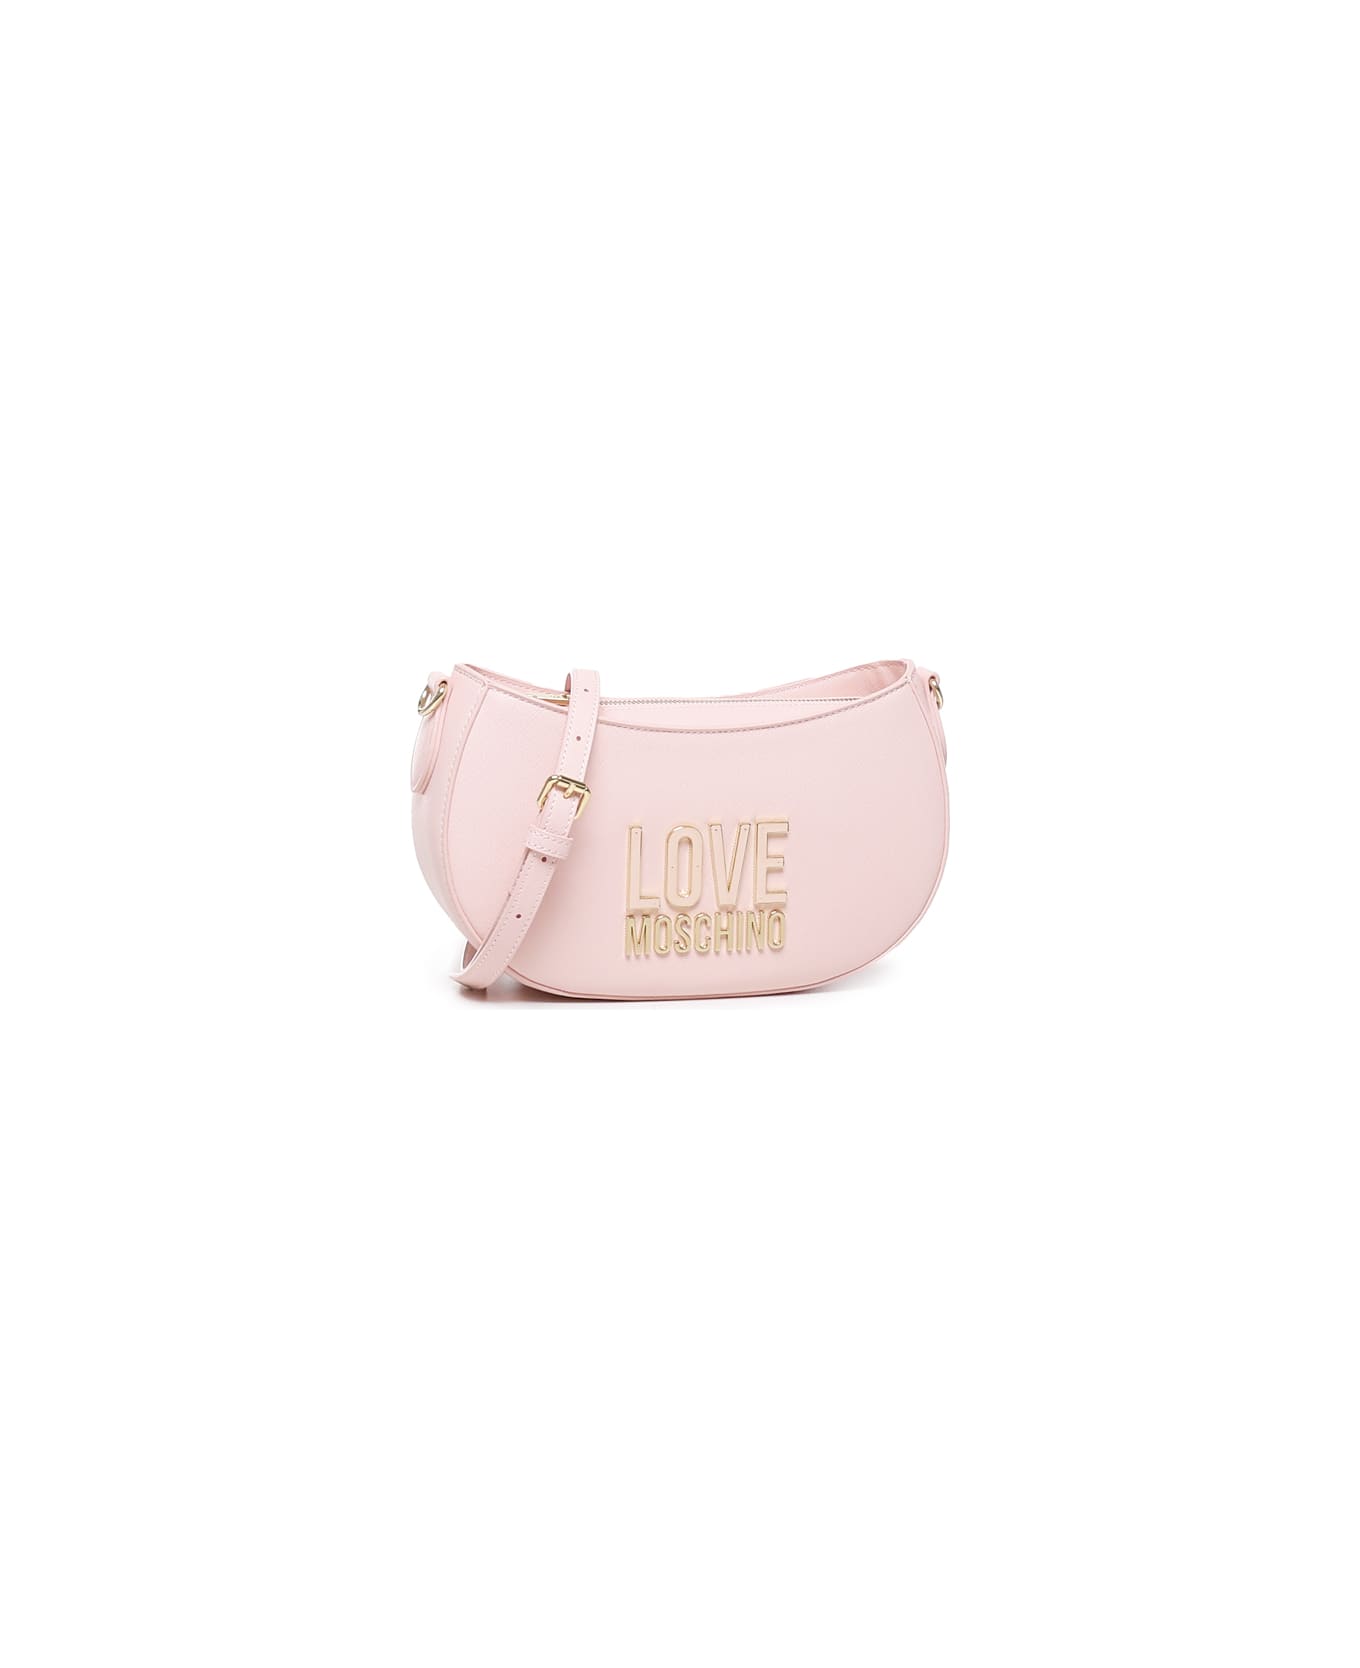 Love Moschino Jelly Shoulder Bag - Pink